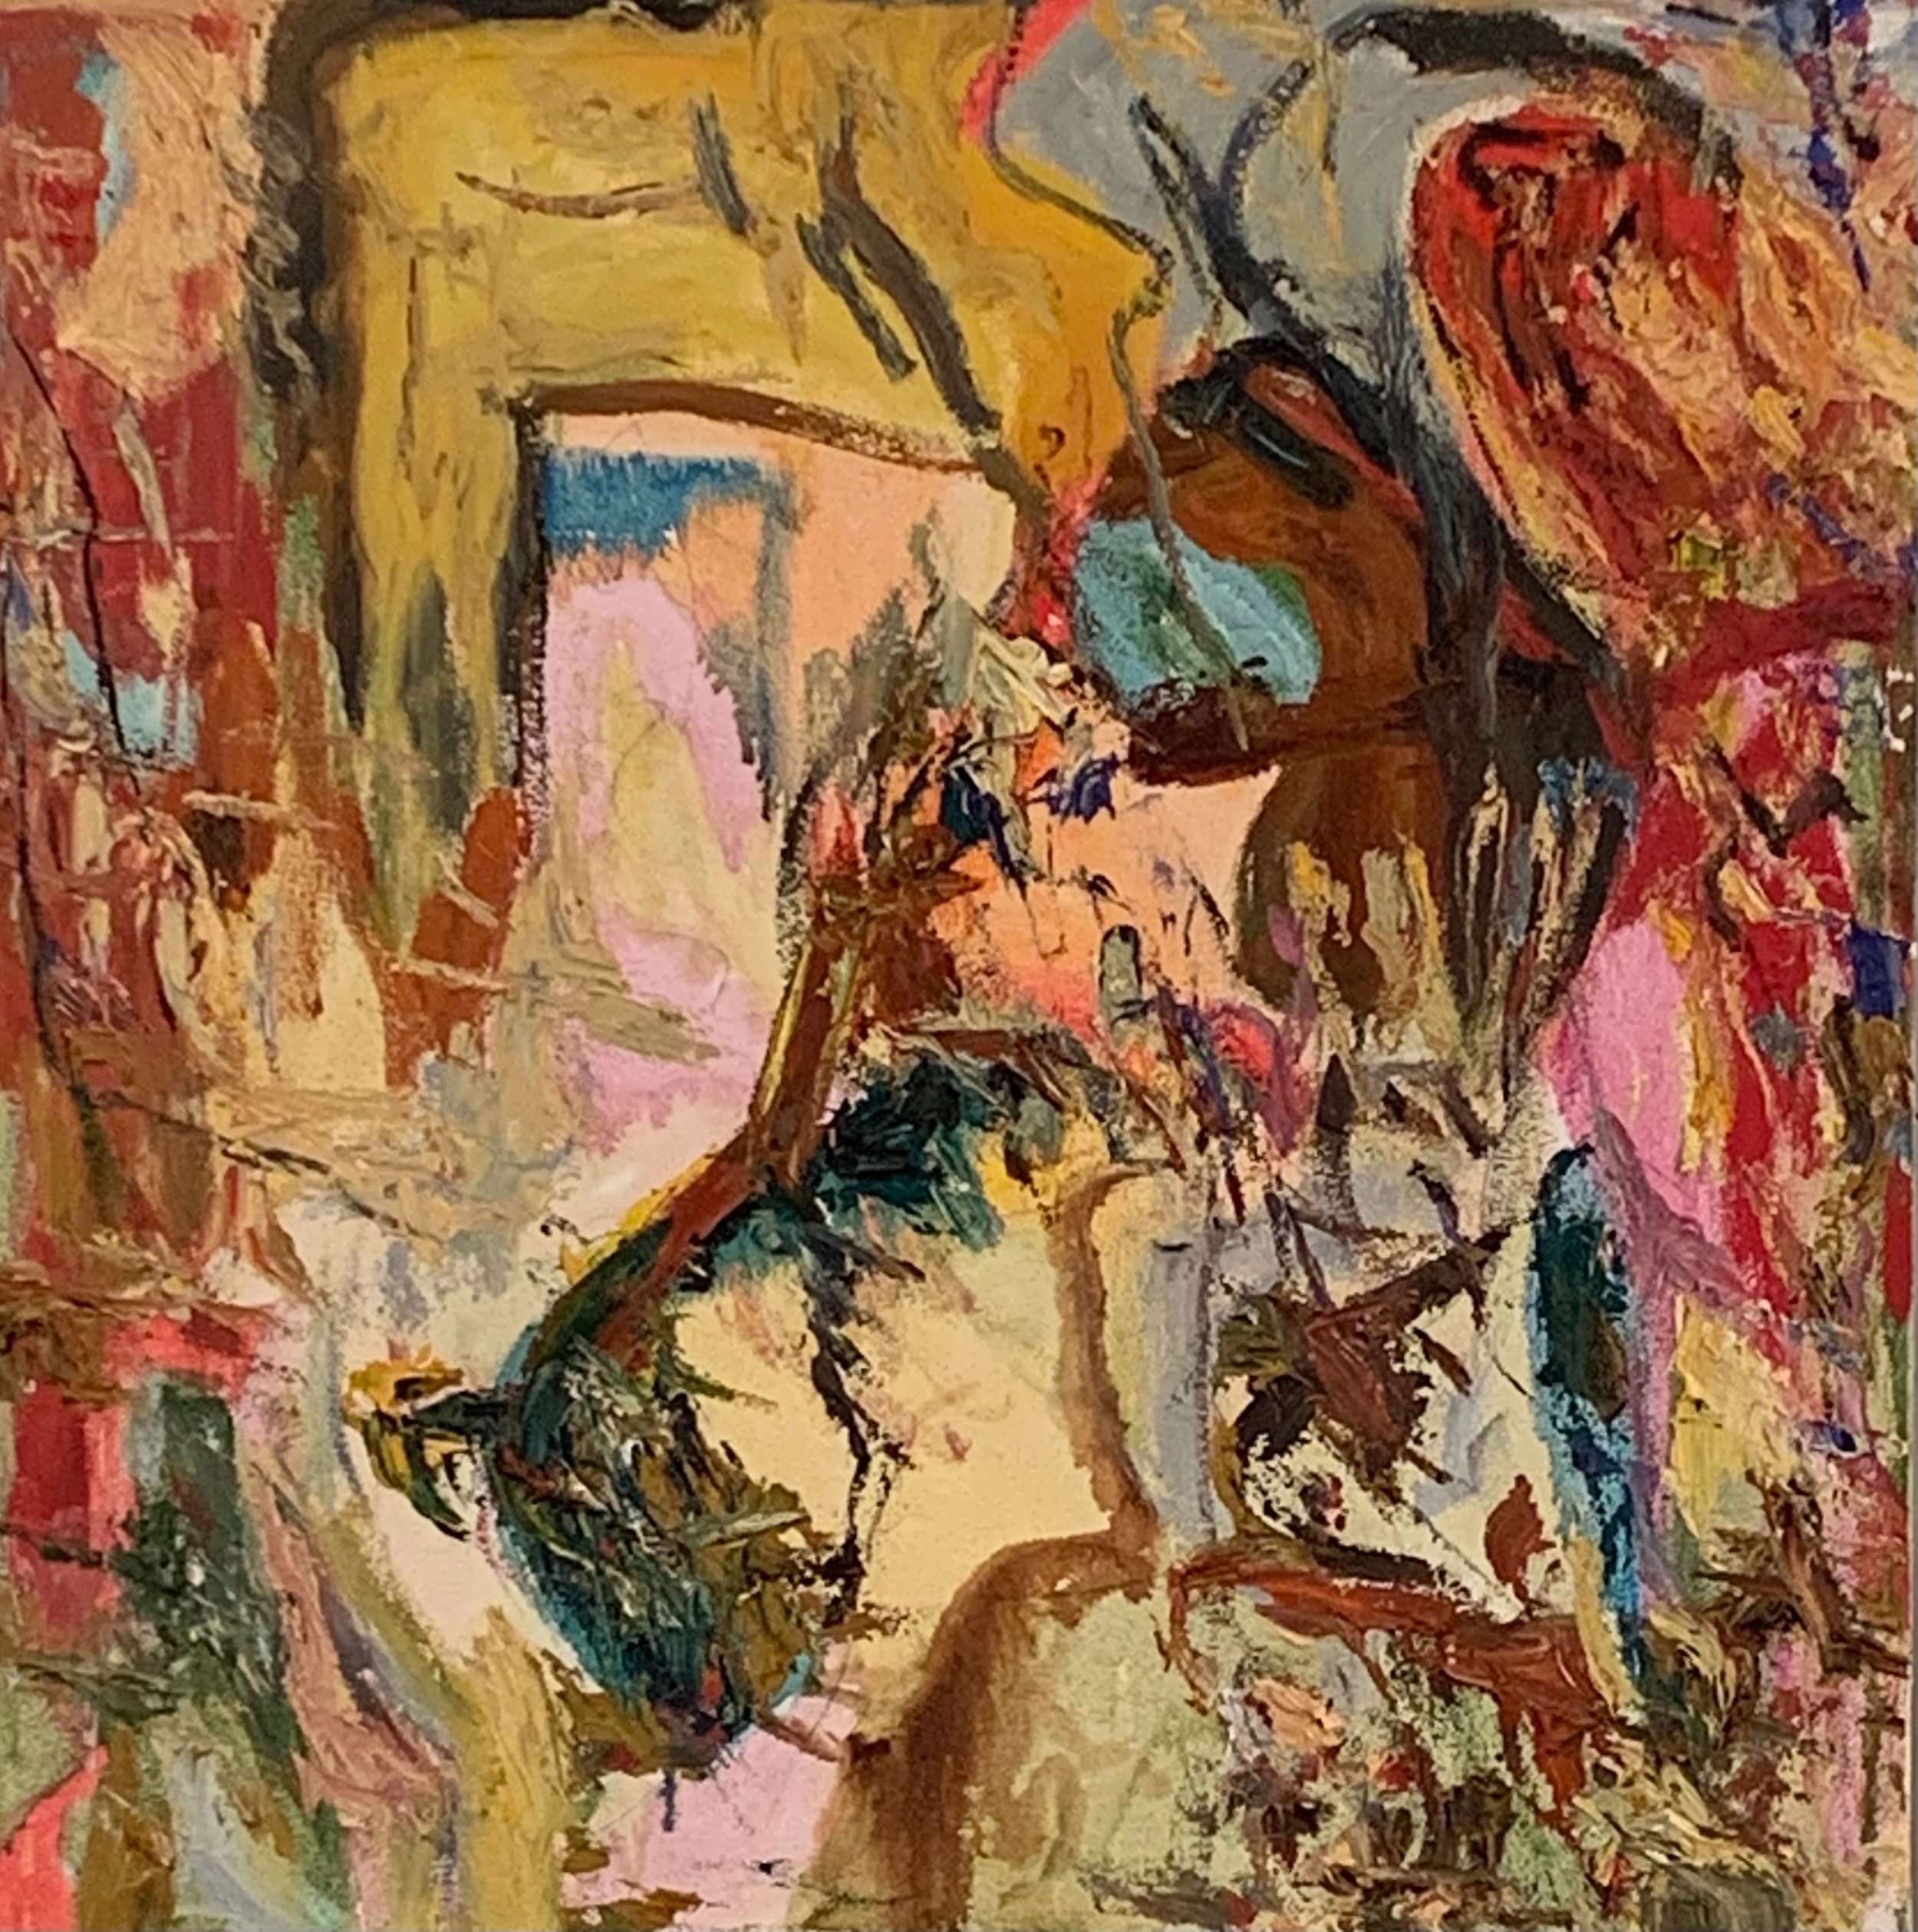  “Structure of Earth #119,” oil on canvas, 24”x24”—June, 1999